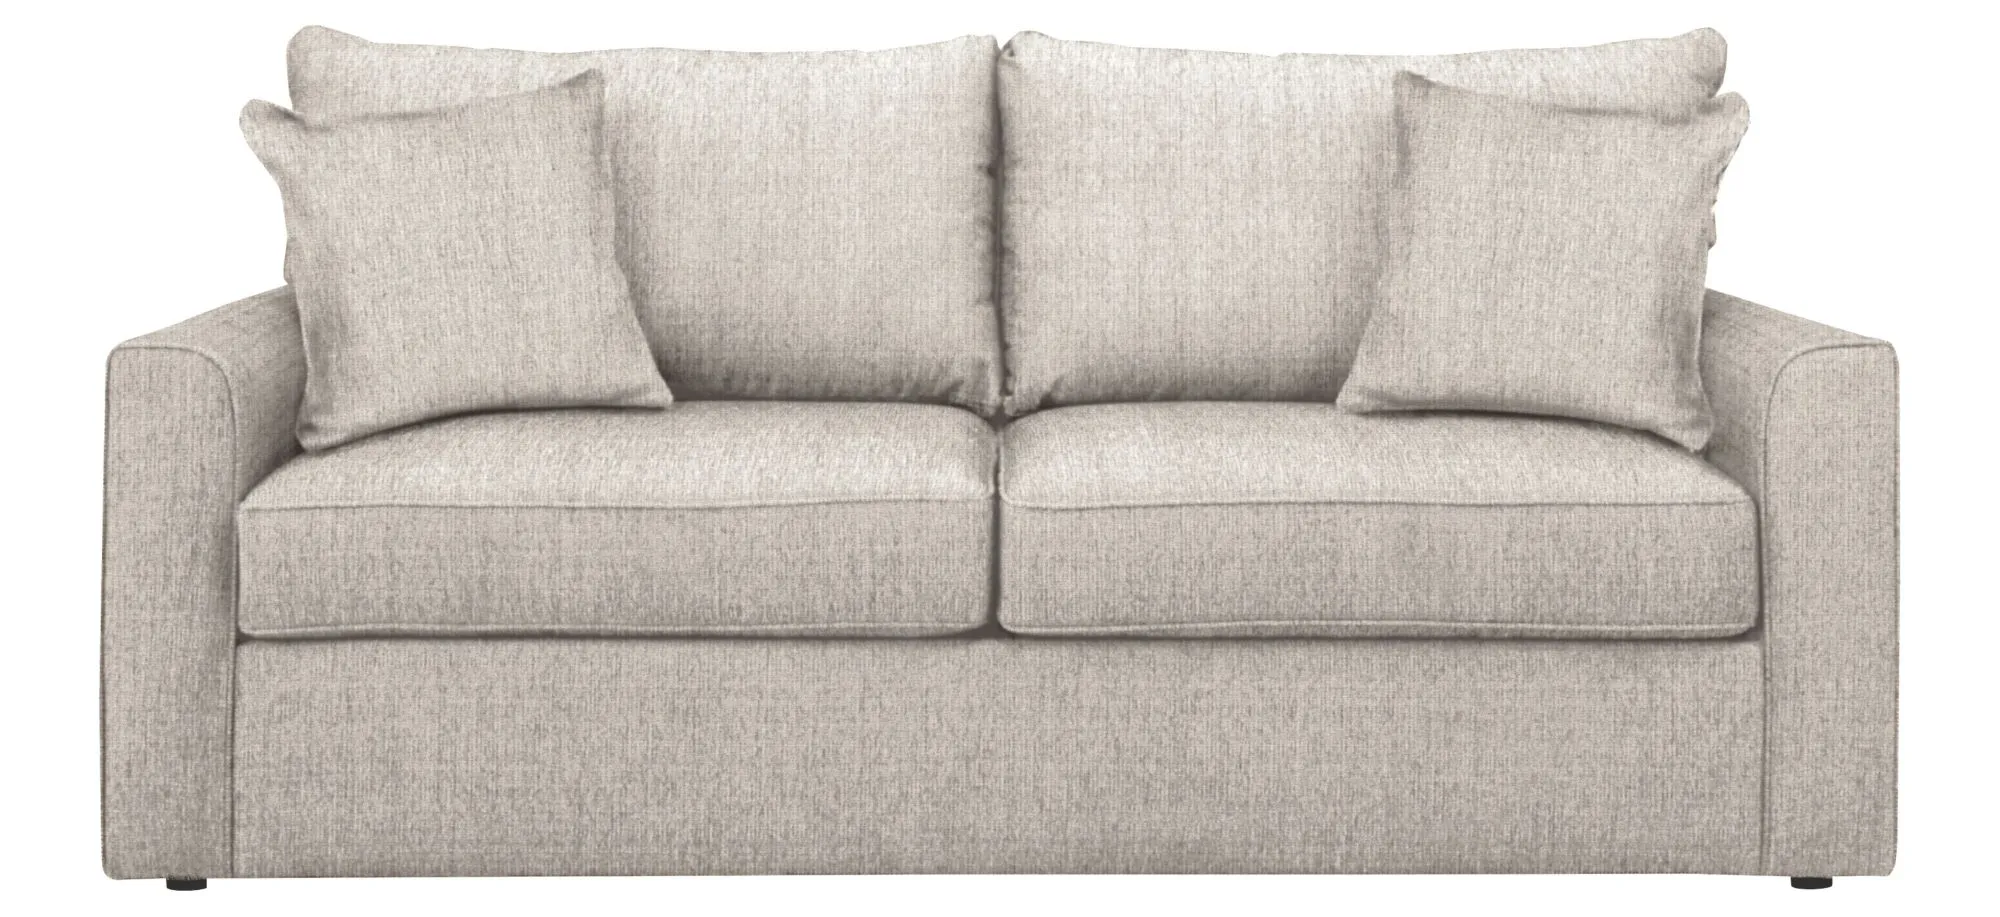 Trayce Queen Sleeper Sofa in Conversation Ivory by Overnight Sofa.